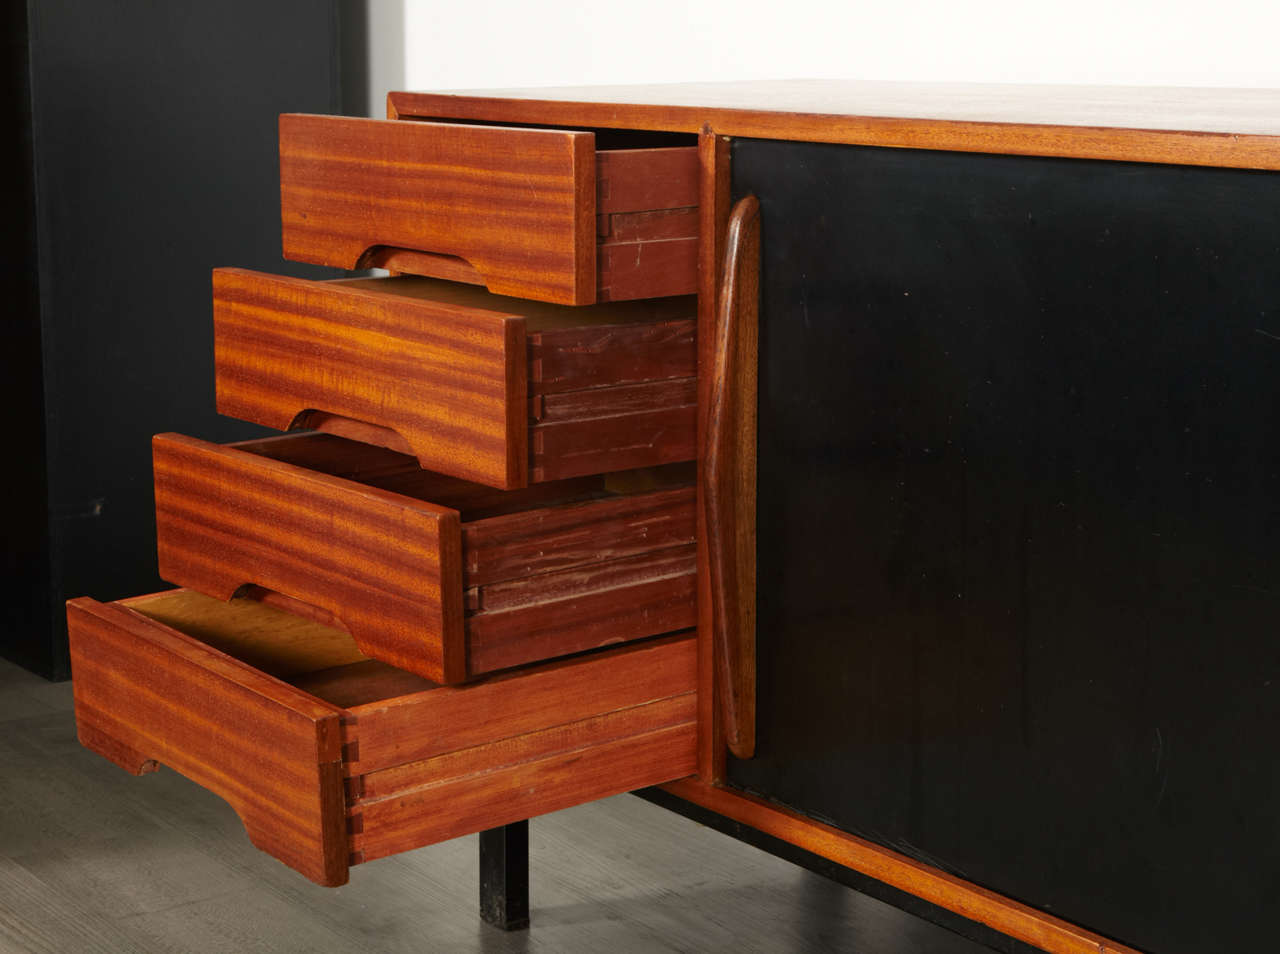 Steel Charlotte Perriand, Cansado Chest